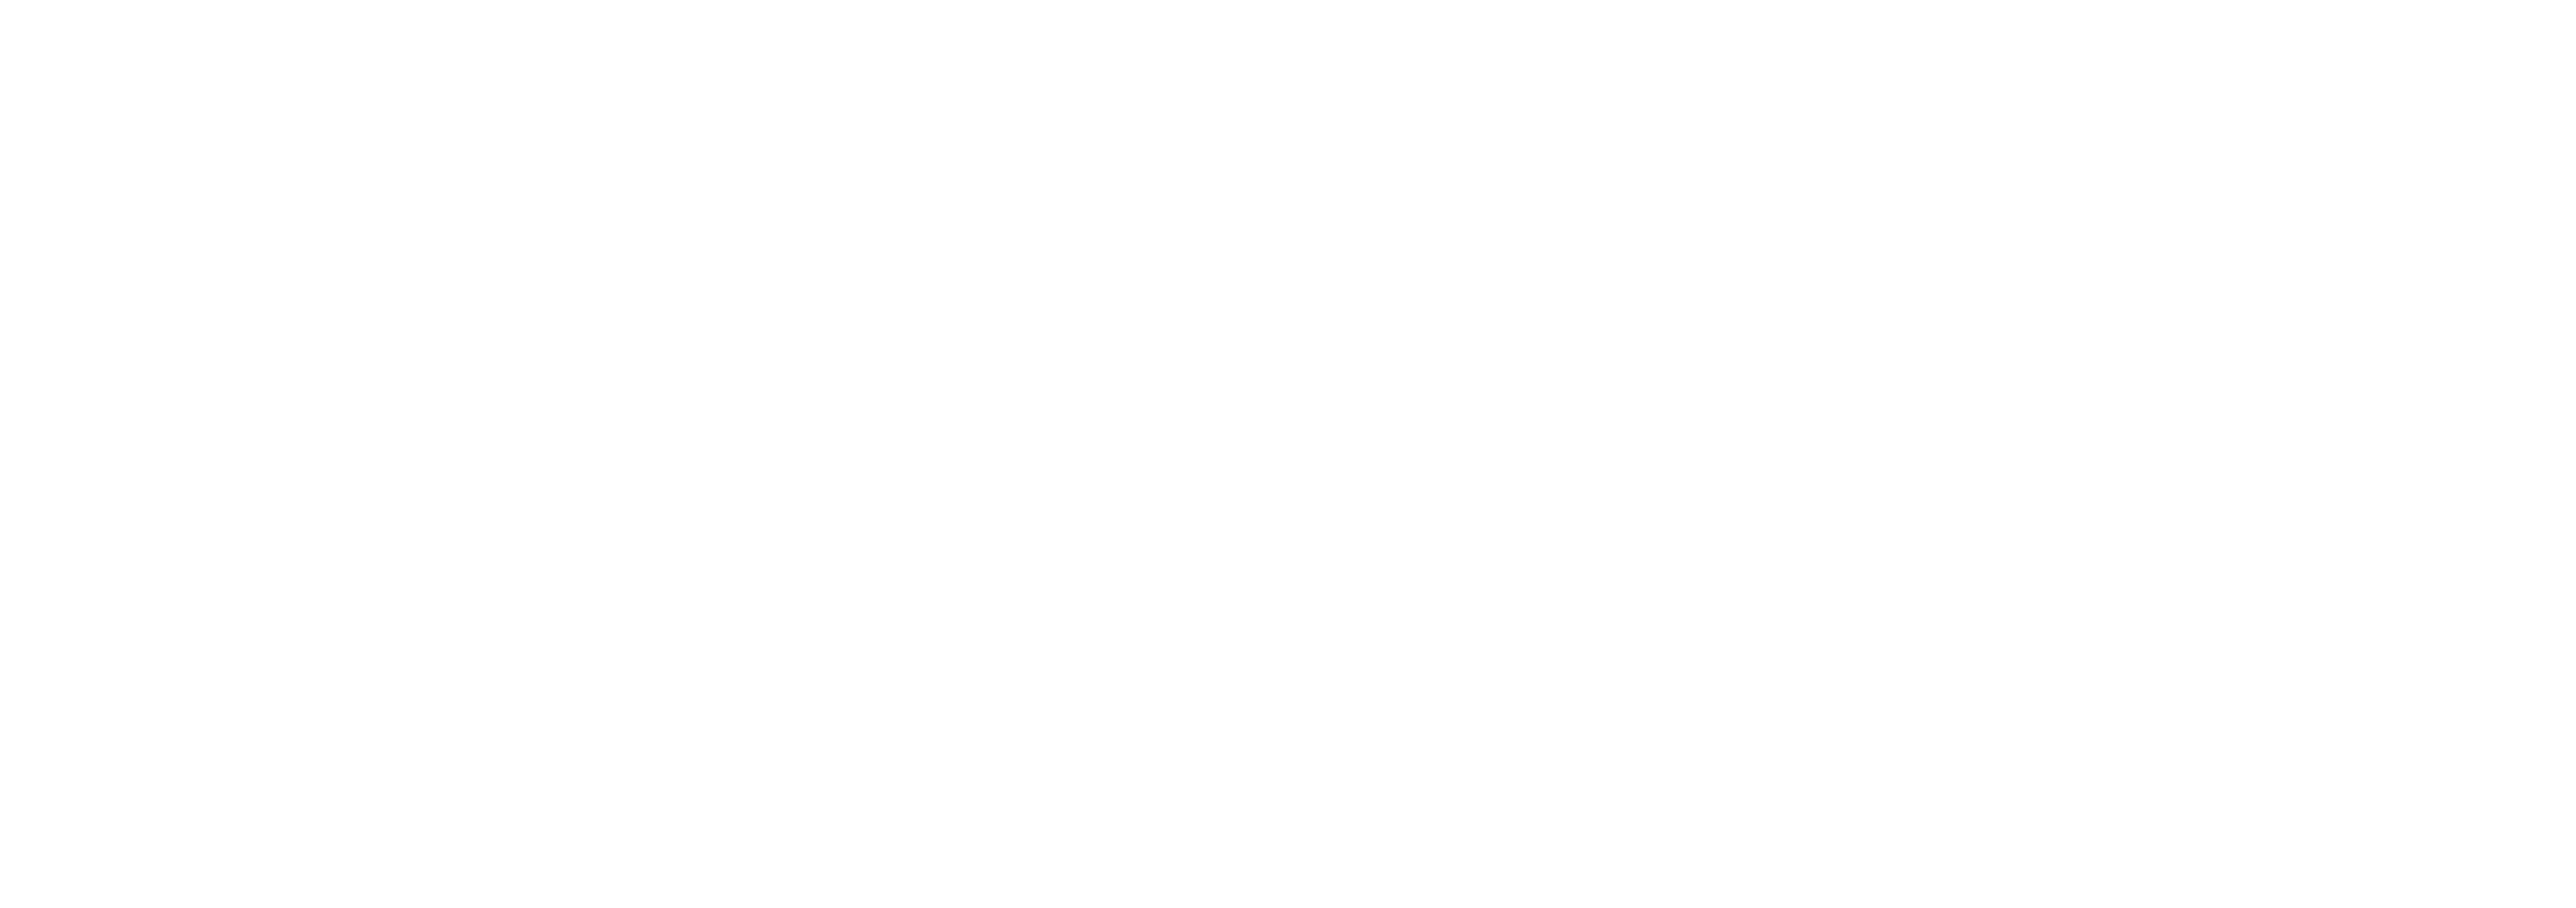 STUDENT WOMAN OF THE YEAR — MEET YOUR 6 FINALISTS